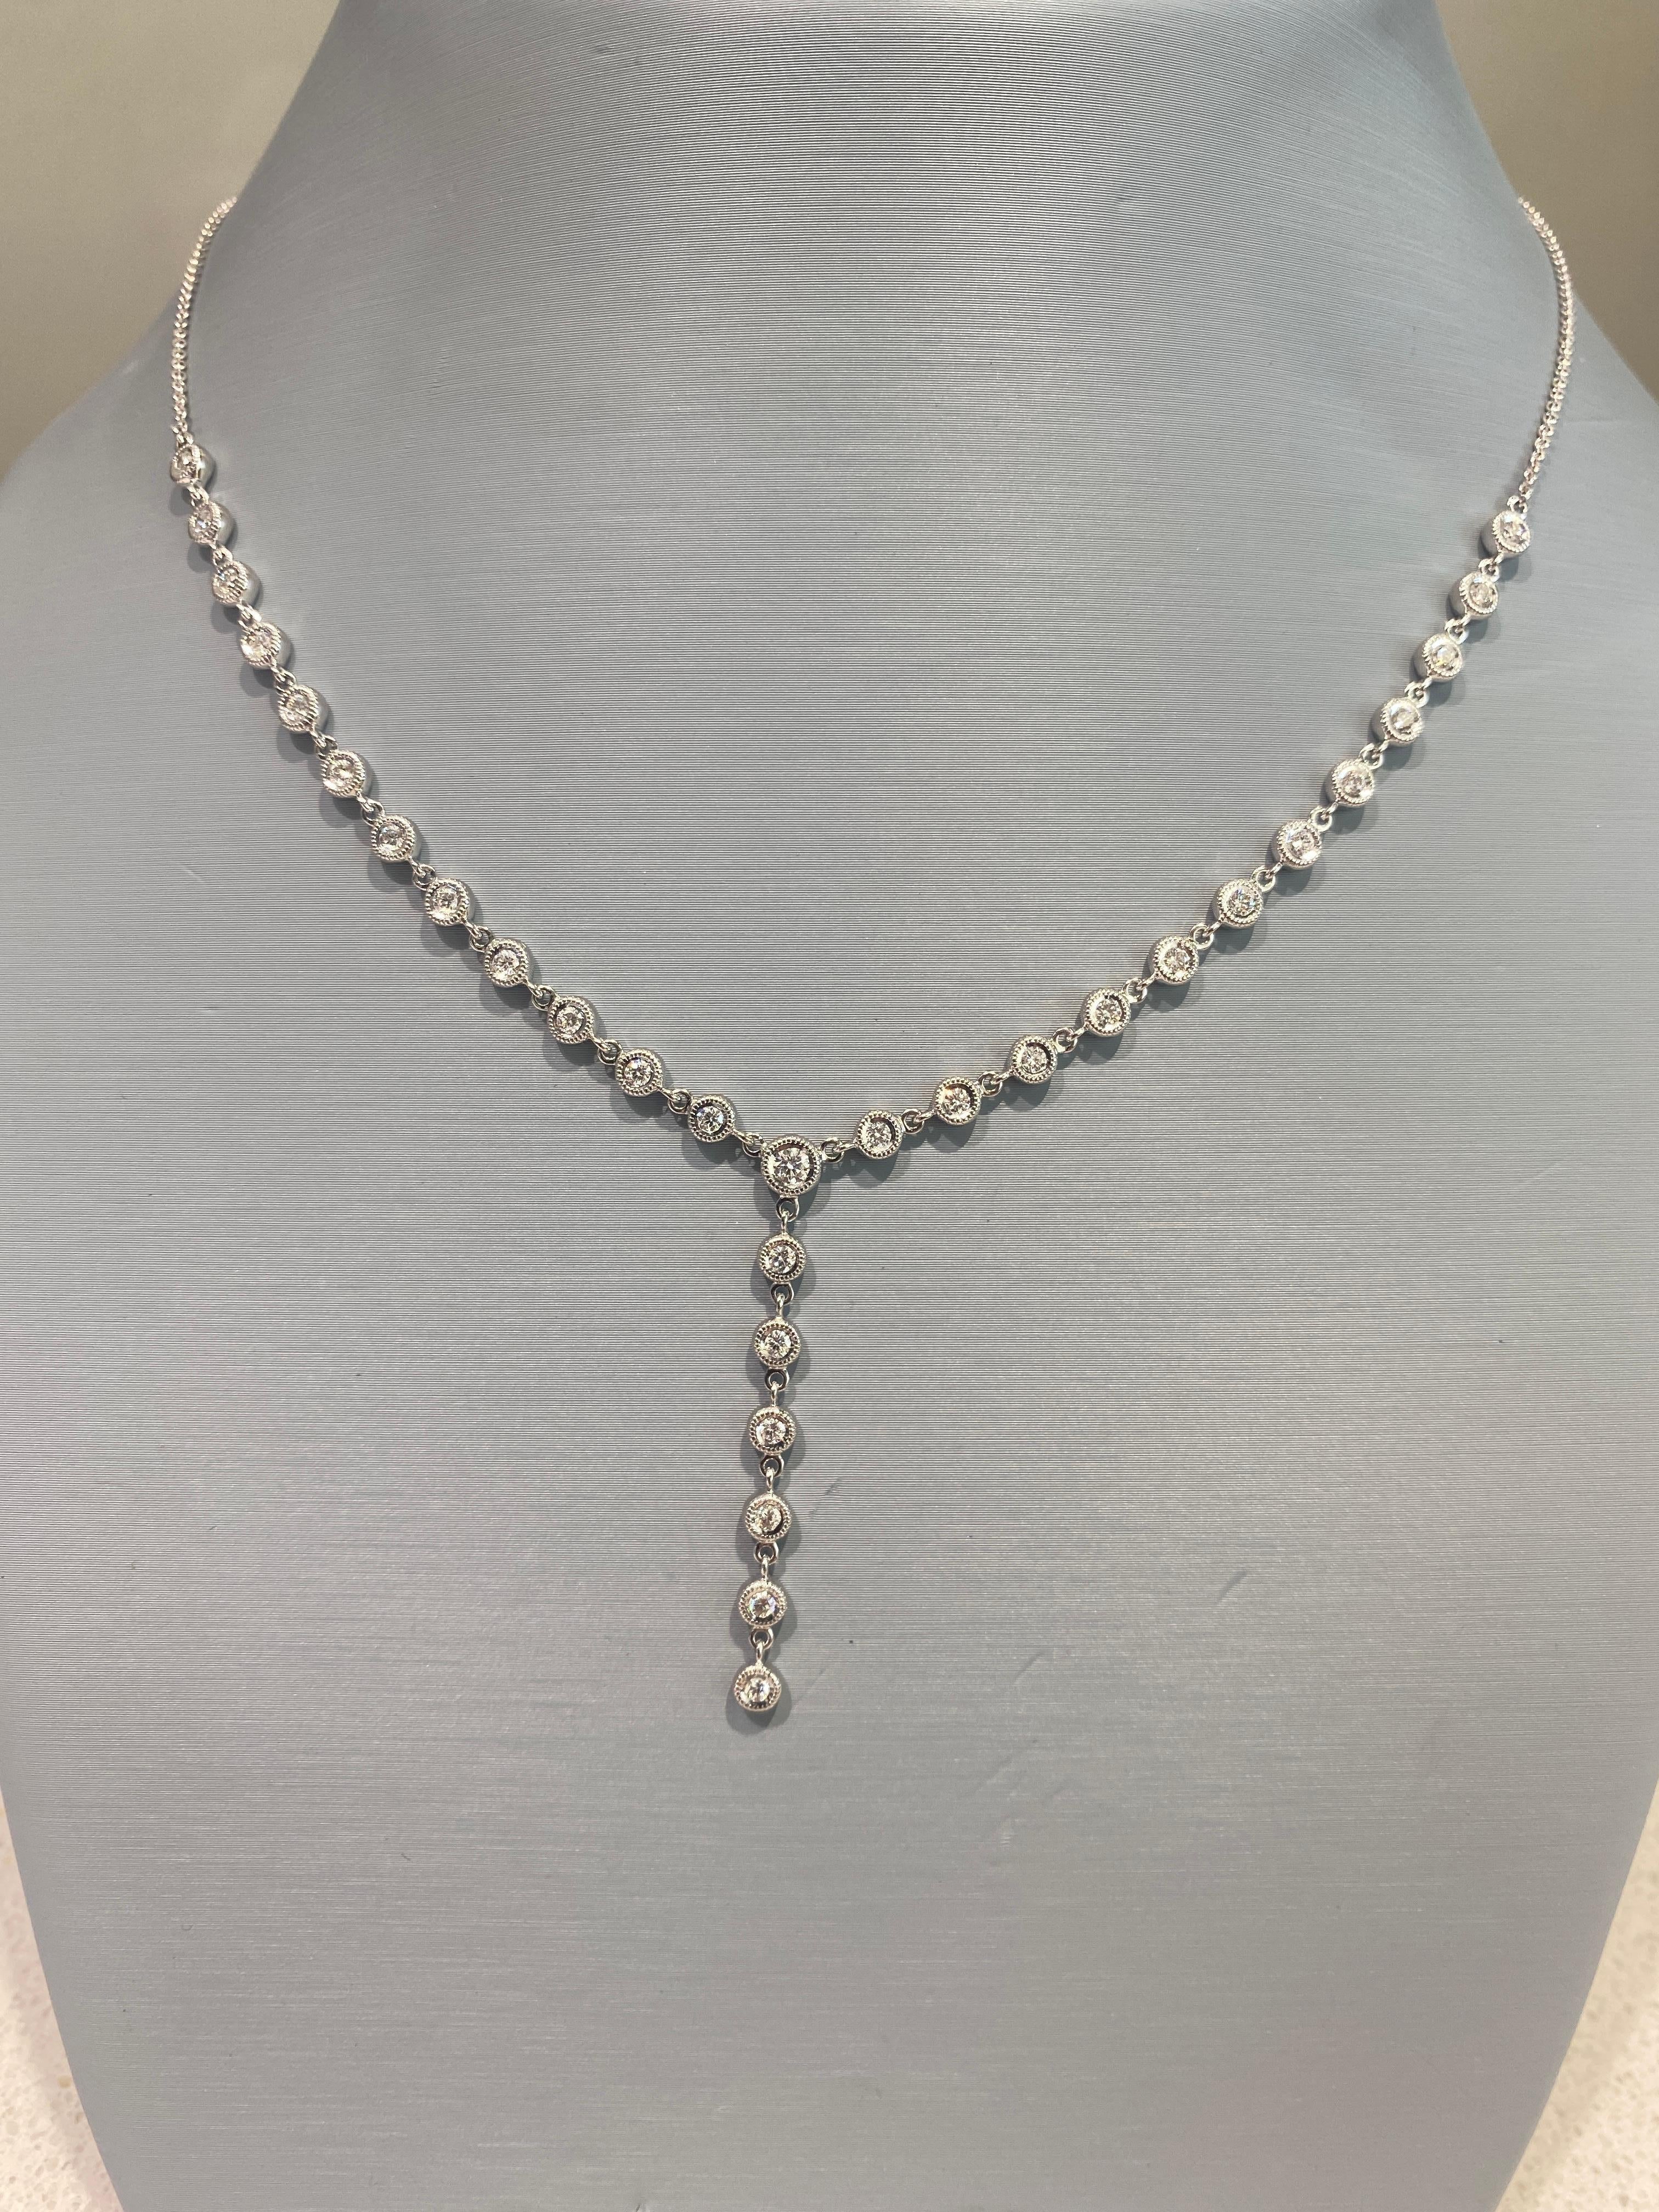 This lariat style necklace from Simon G. features 0.92 carat total weight in bezel set round brilliant cut diamonds set in 18 karat white gold. The chain is 18